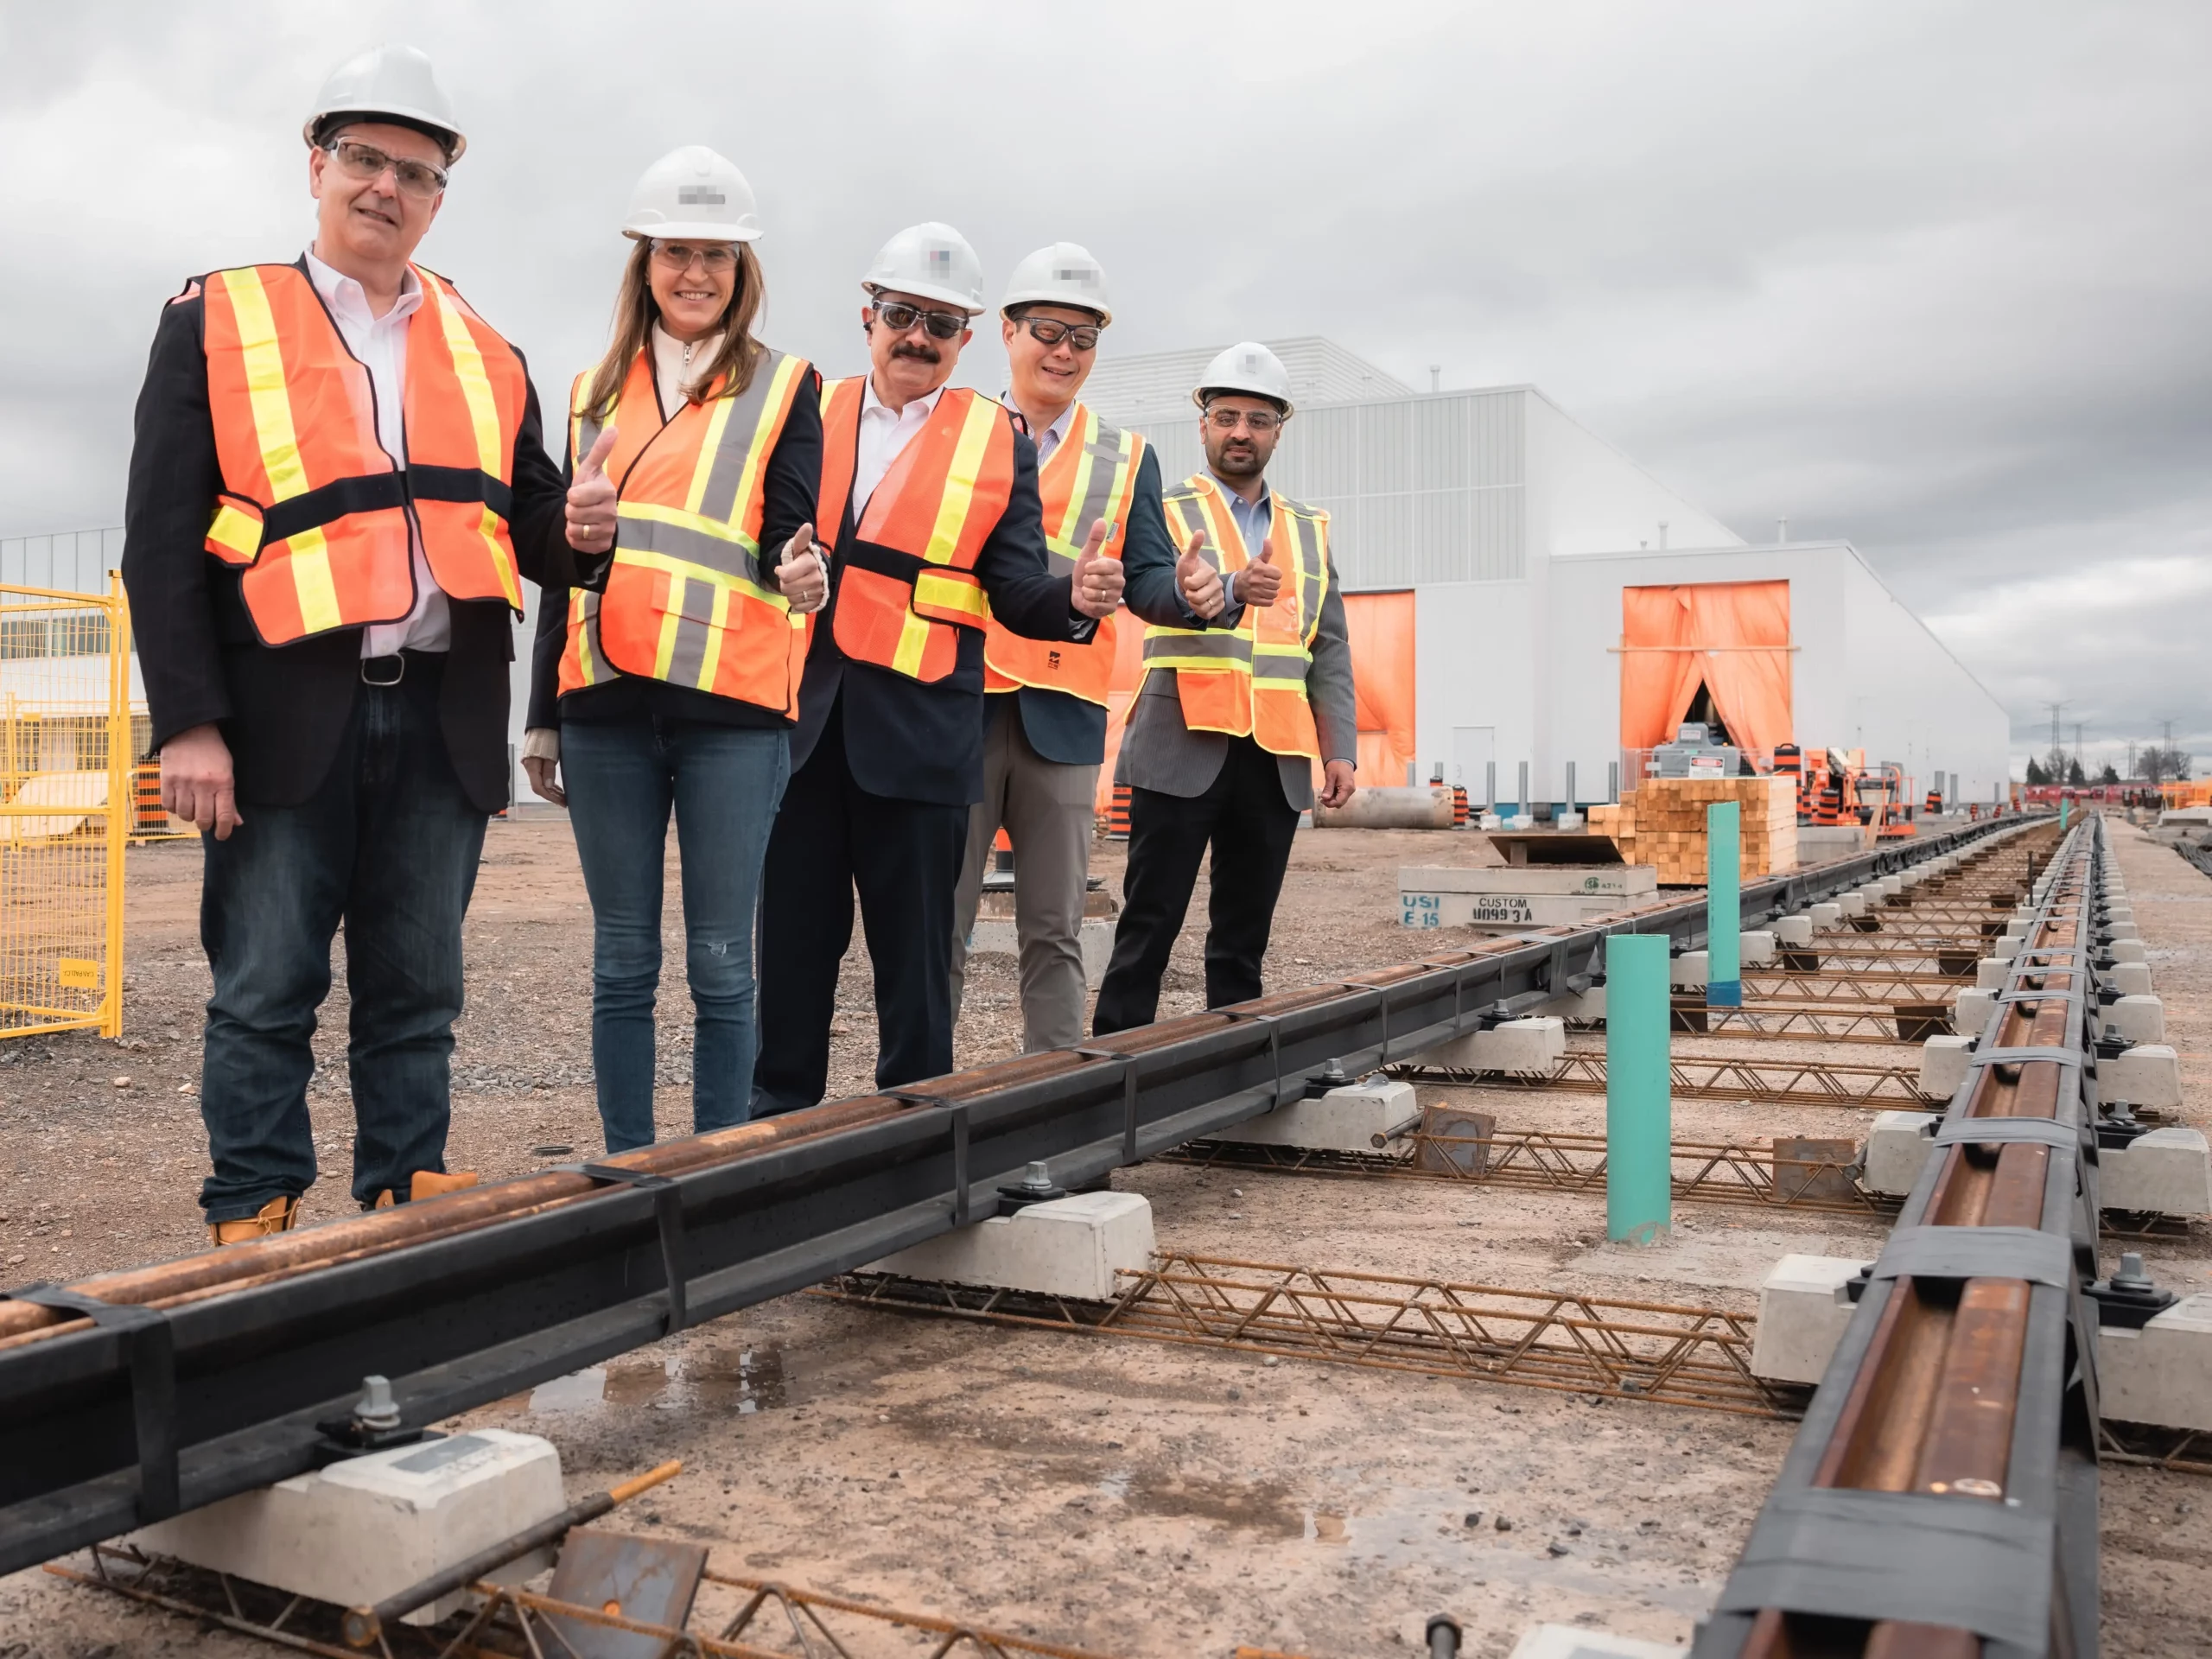 MPP Sabawy, Minister Mulroney, Minister Cho, and other MPPs wearing protective construction gear give a thumbs up in front of a section of track for the Hazel McCallion LRT.